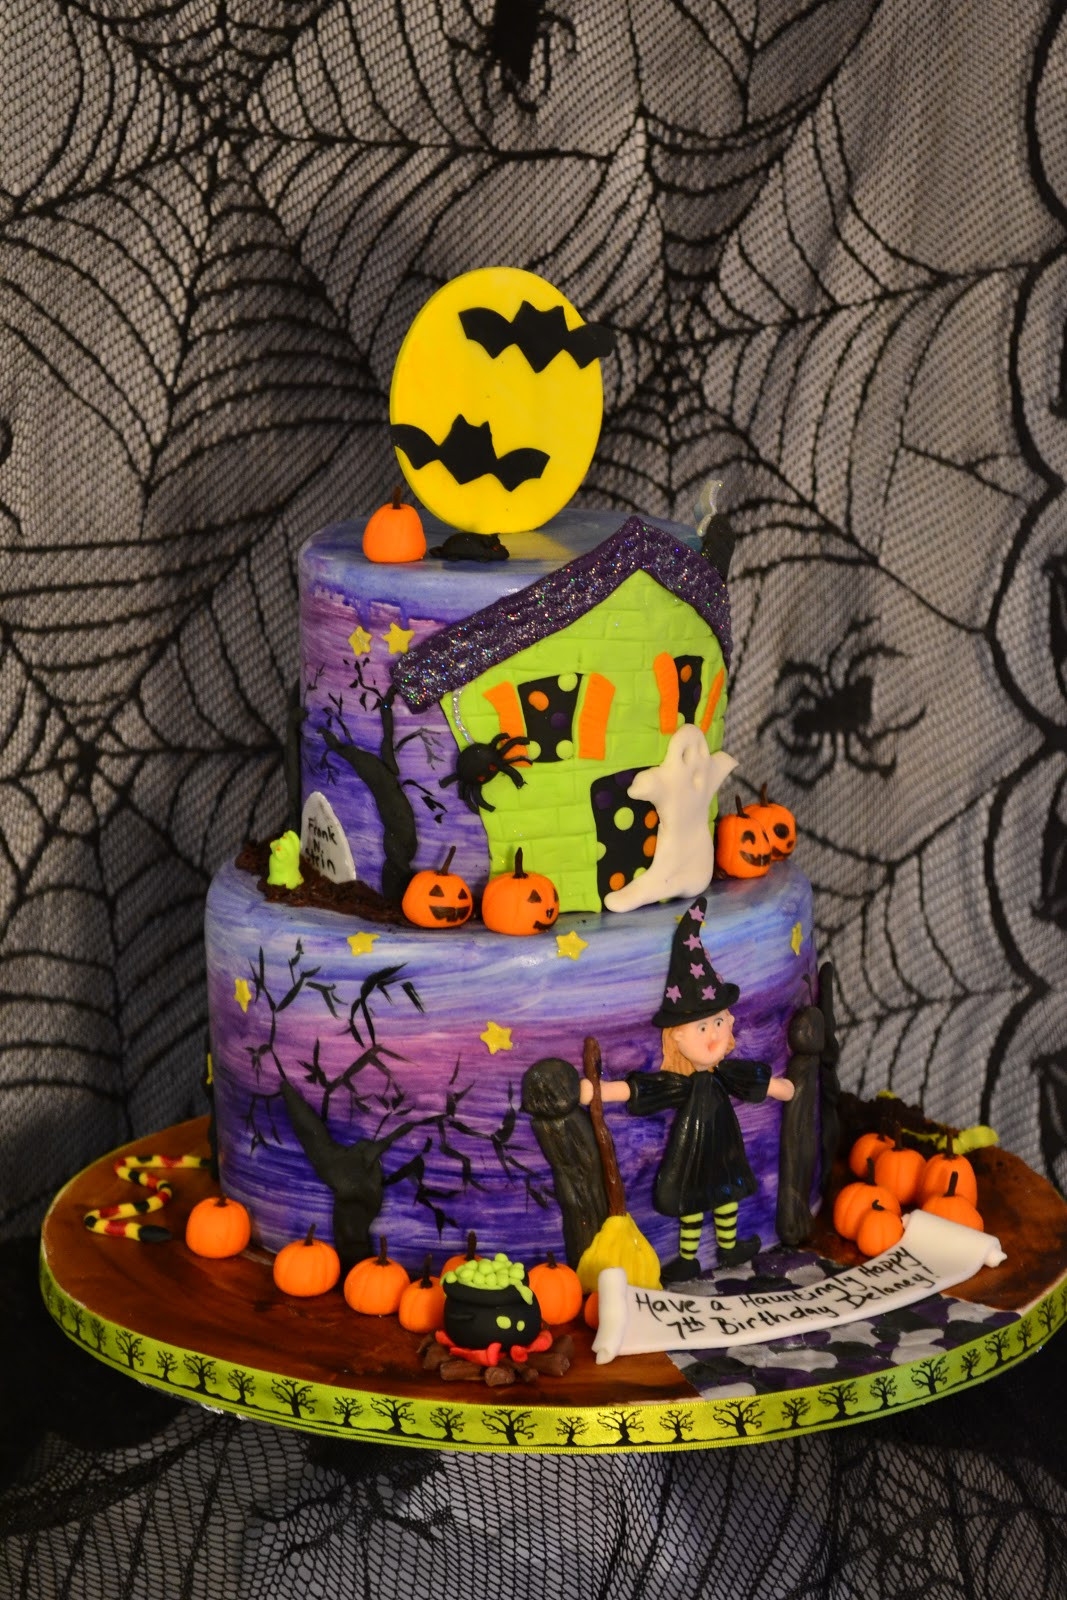 Halloween Birthday Cake Pictures
 Oh just put a cupcake in it Halloween birthday cake